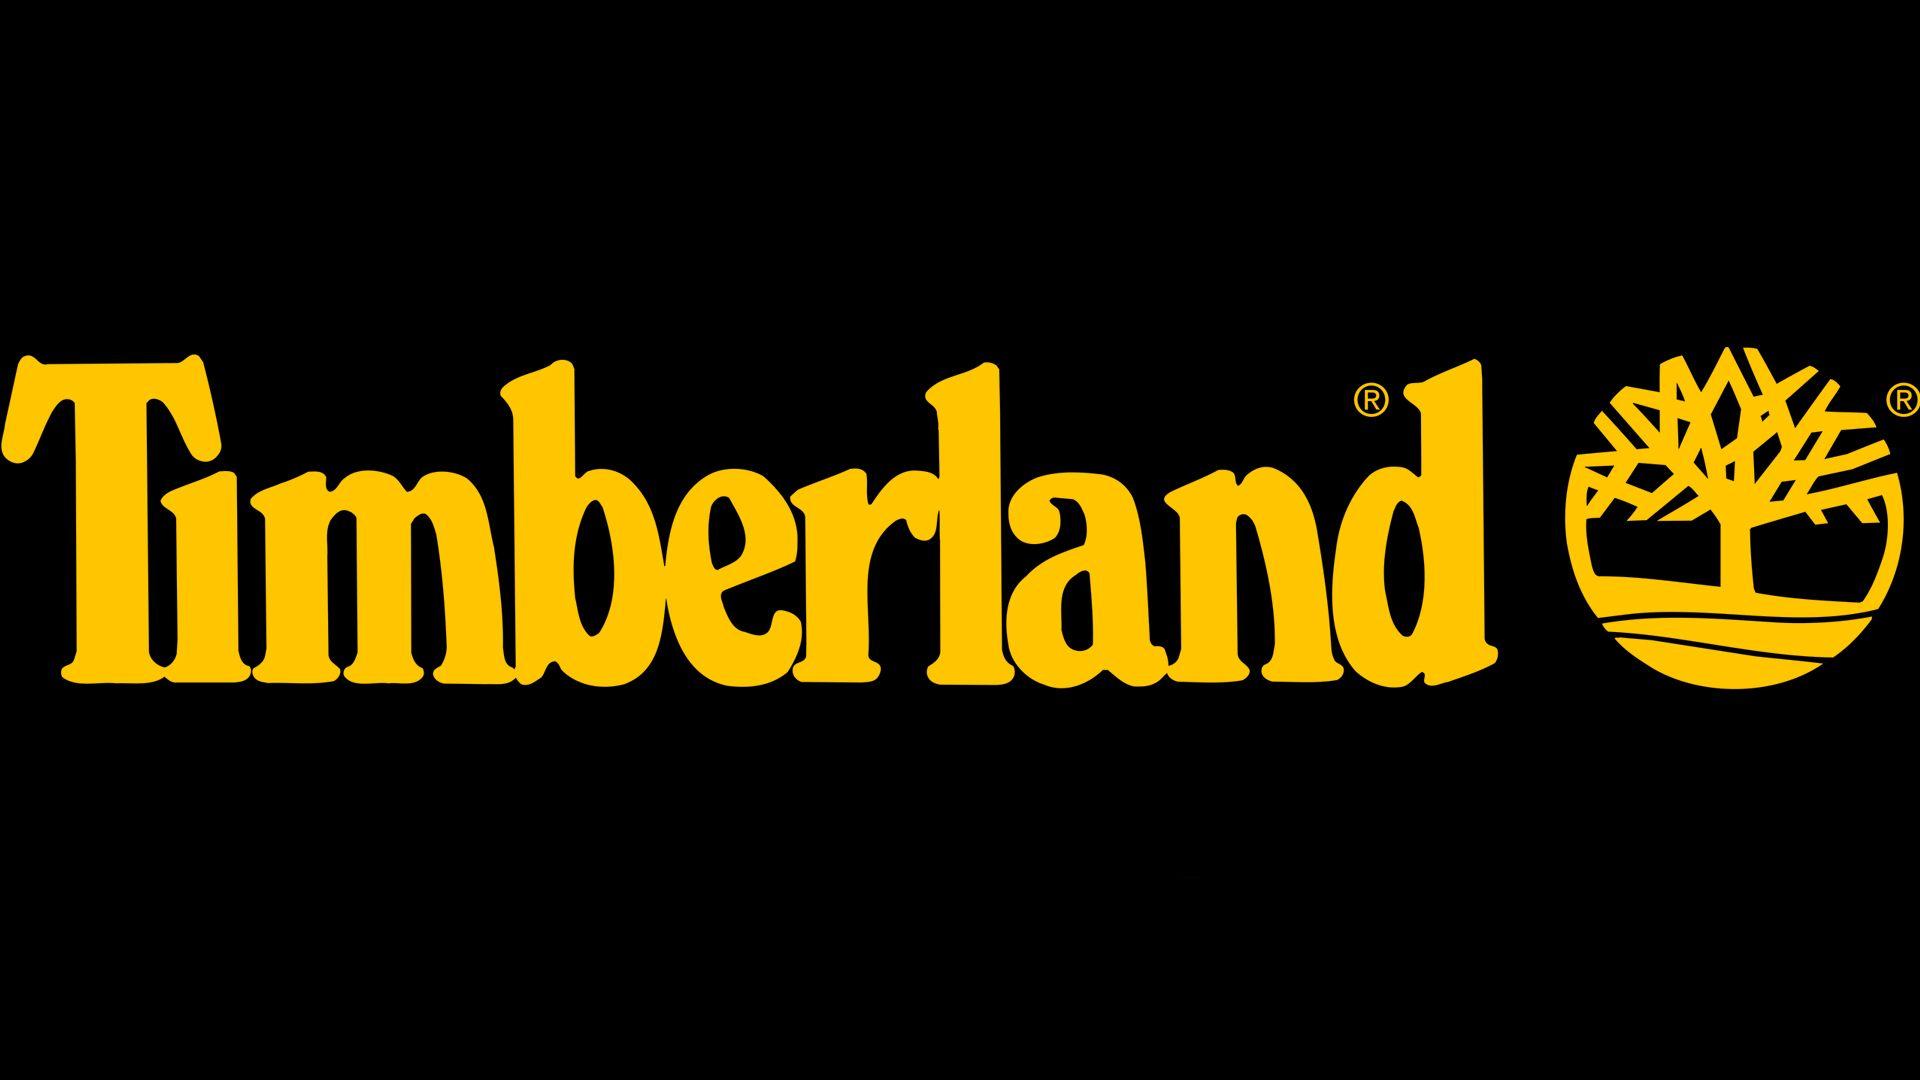 Timeberland Logo - Meaning Timberland logo and symbol | history and evolution